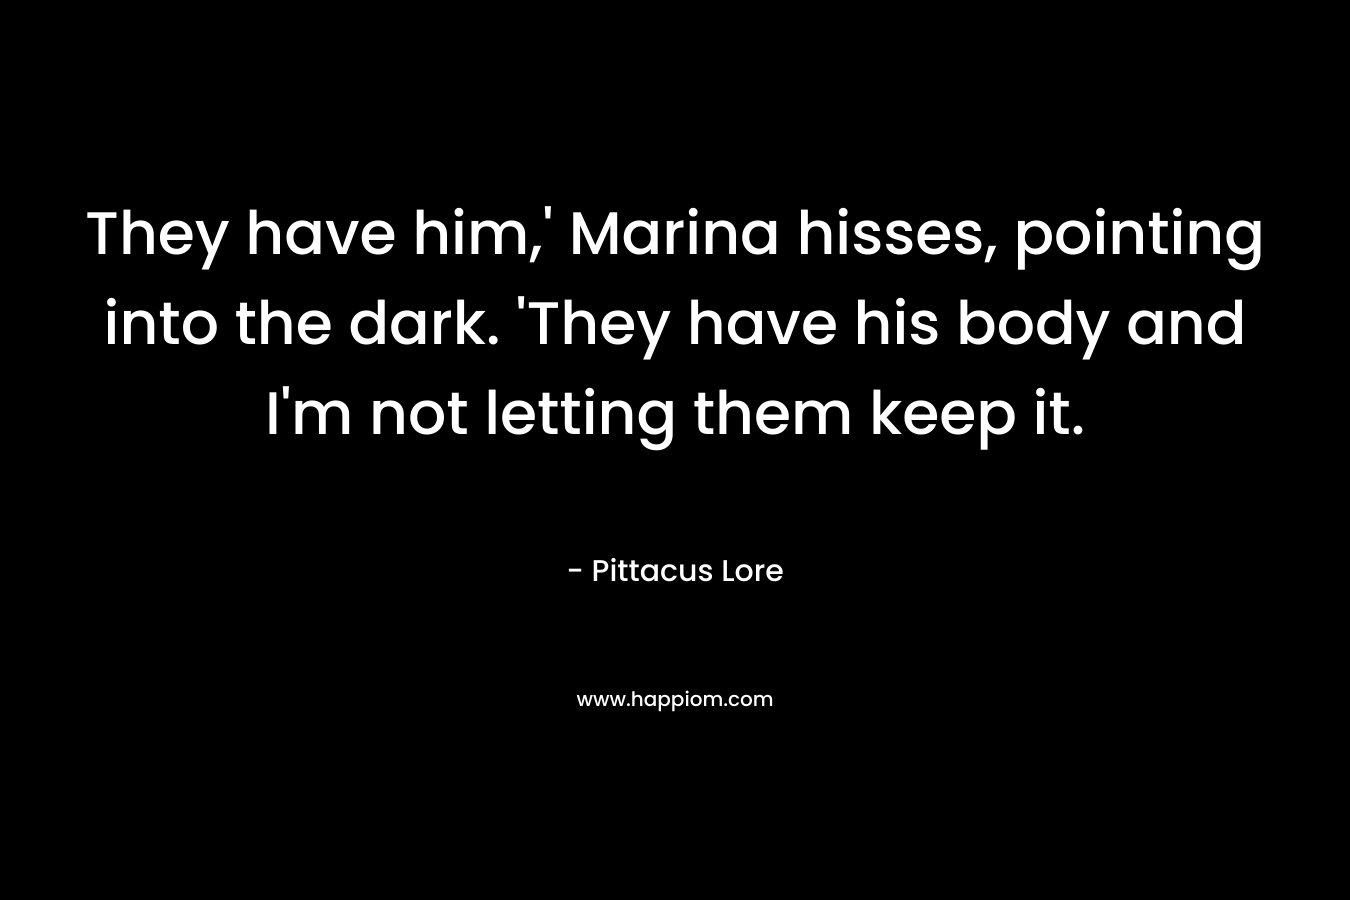 They have him,' Marina hisses, pointing into the dark. 'They have his body and I'm not letting them keep it.